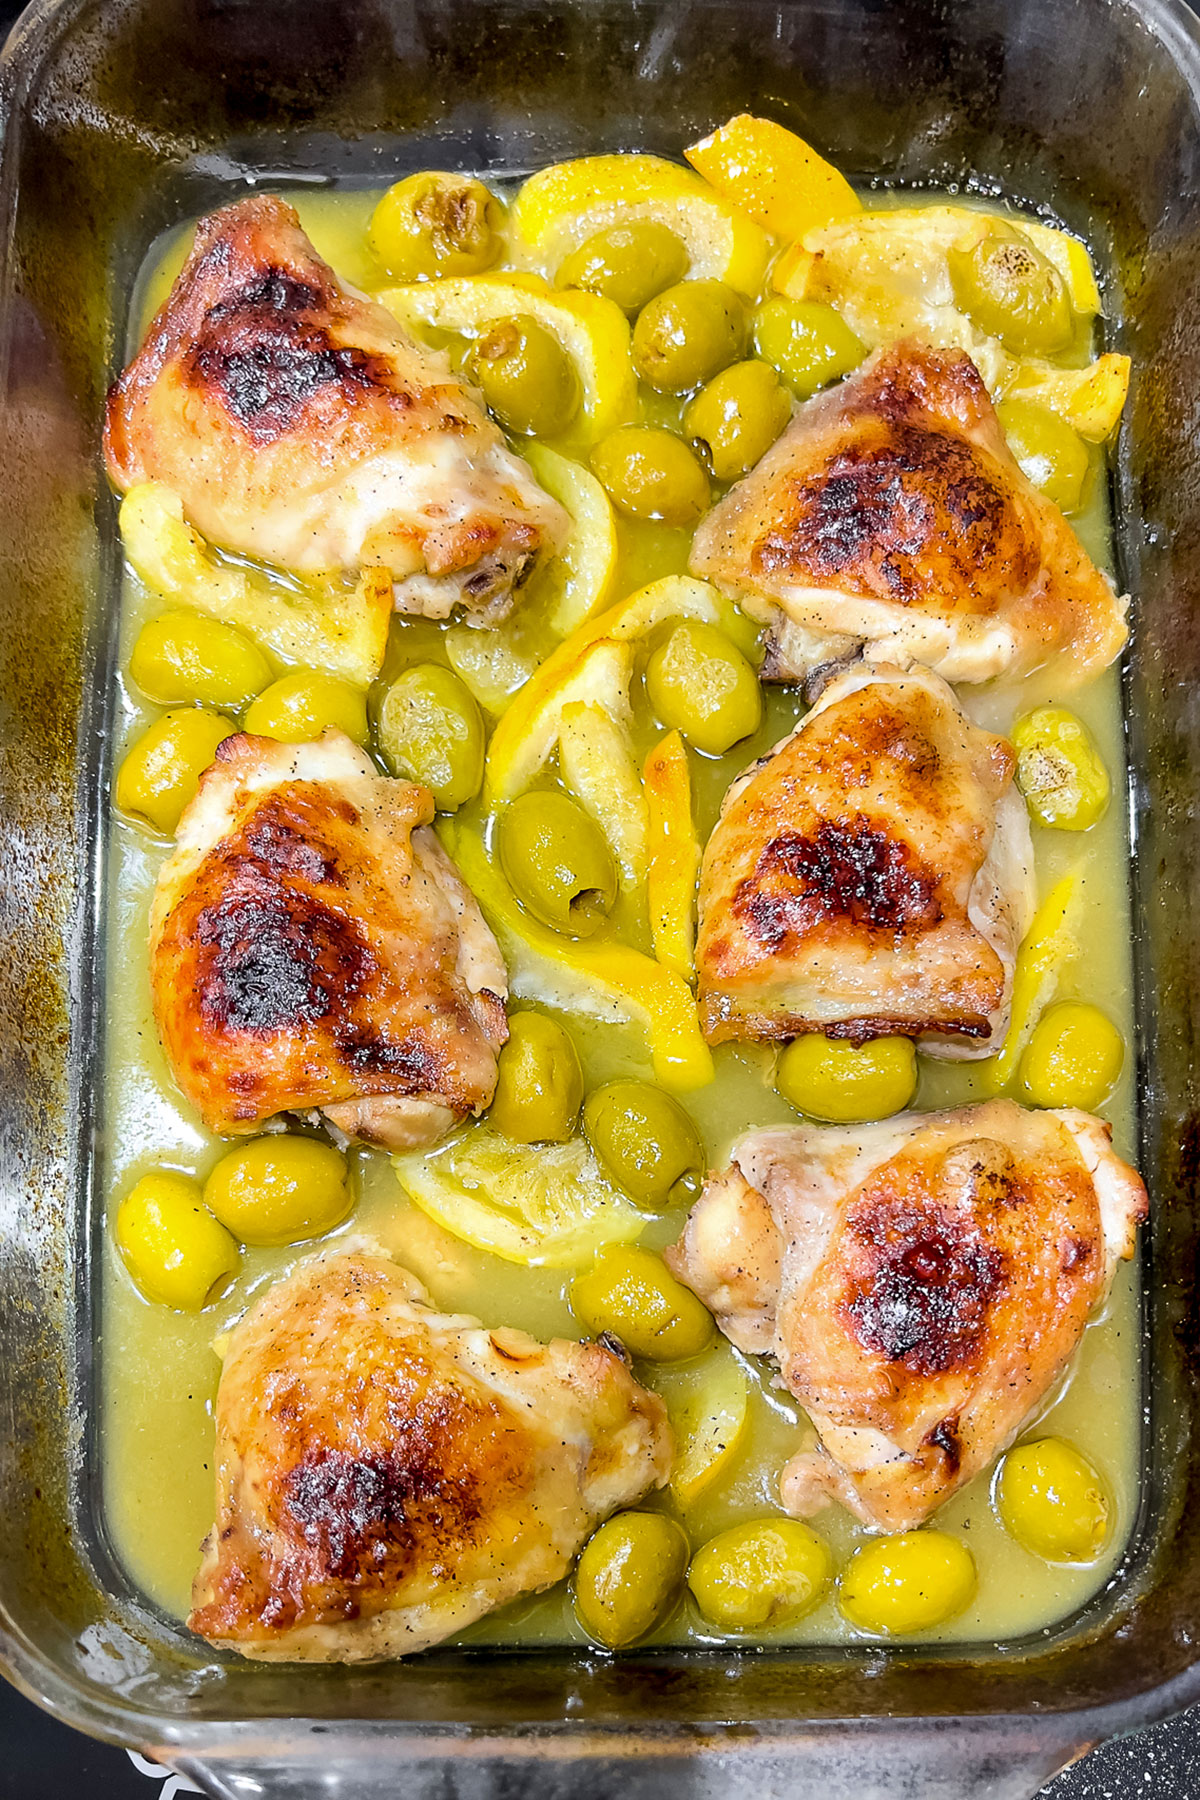 Chicken with olives and lemon in a baking tray0